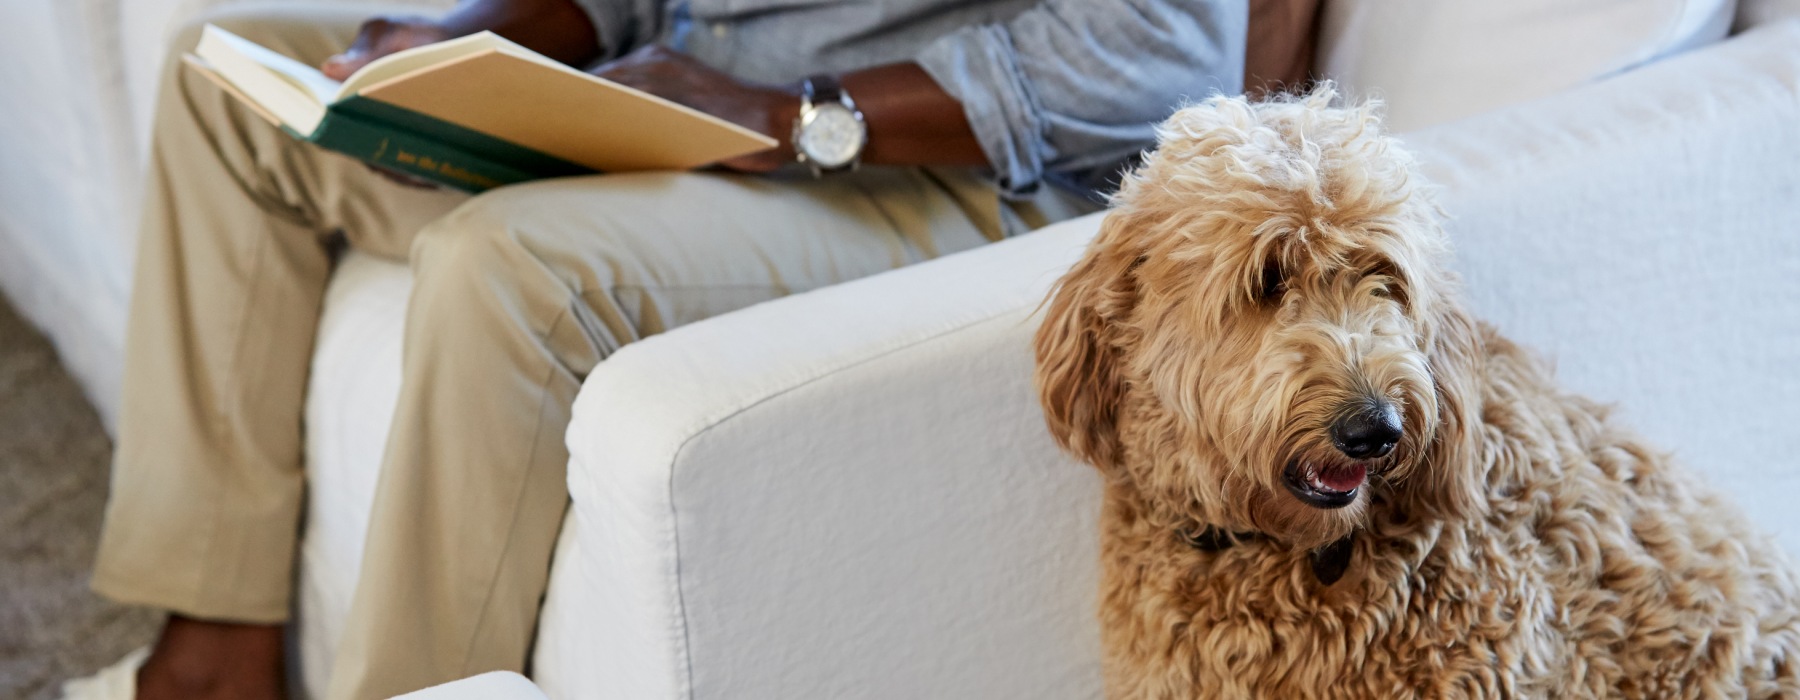 Man sitting next to goldendoodle